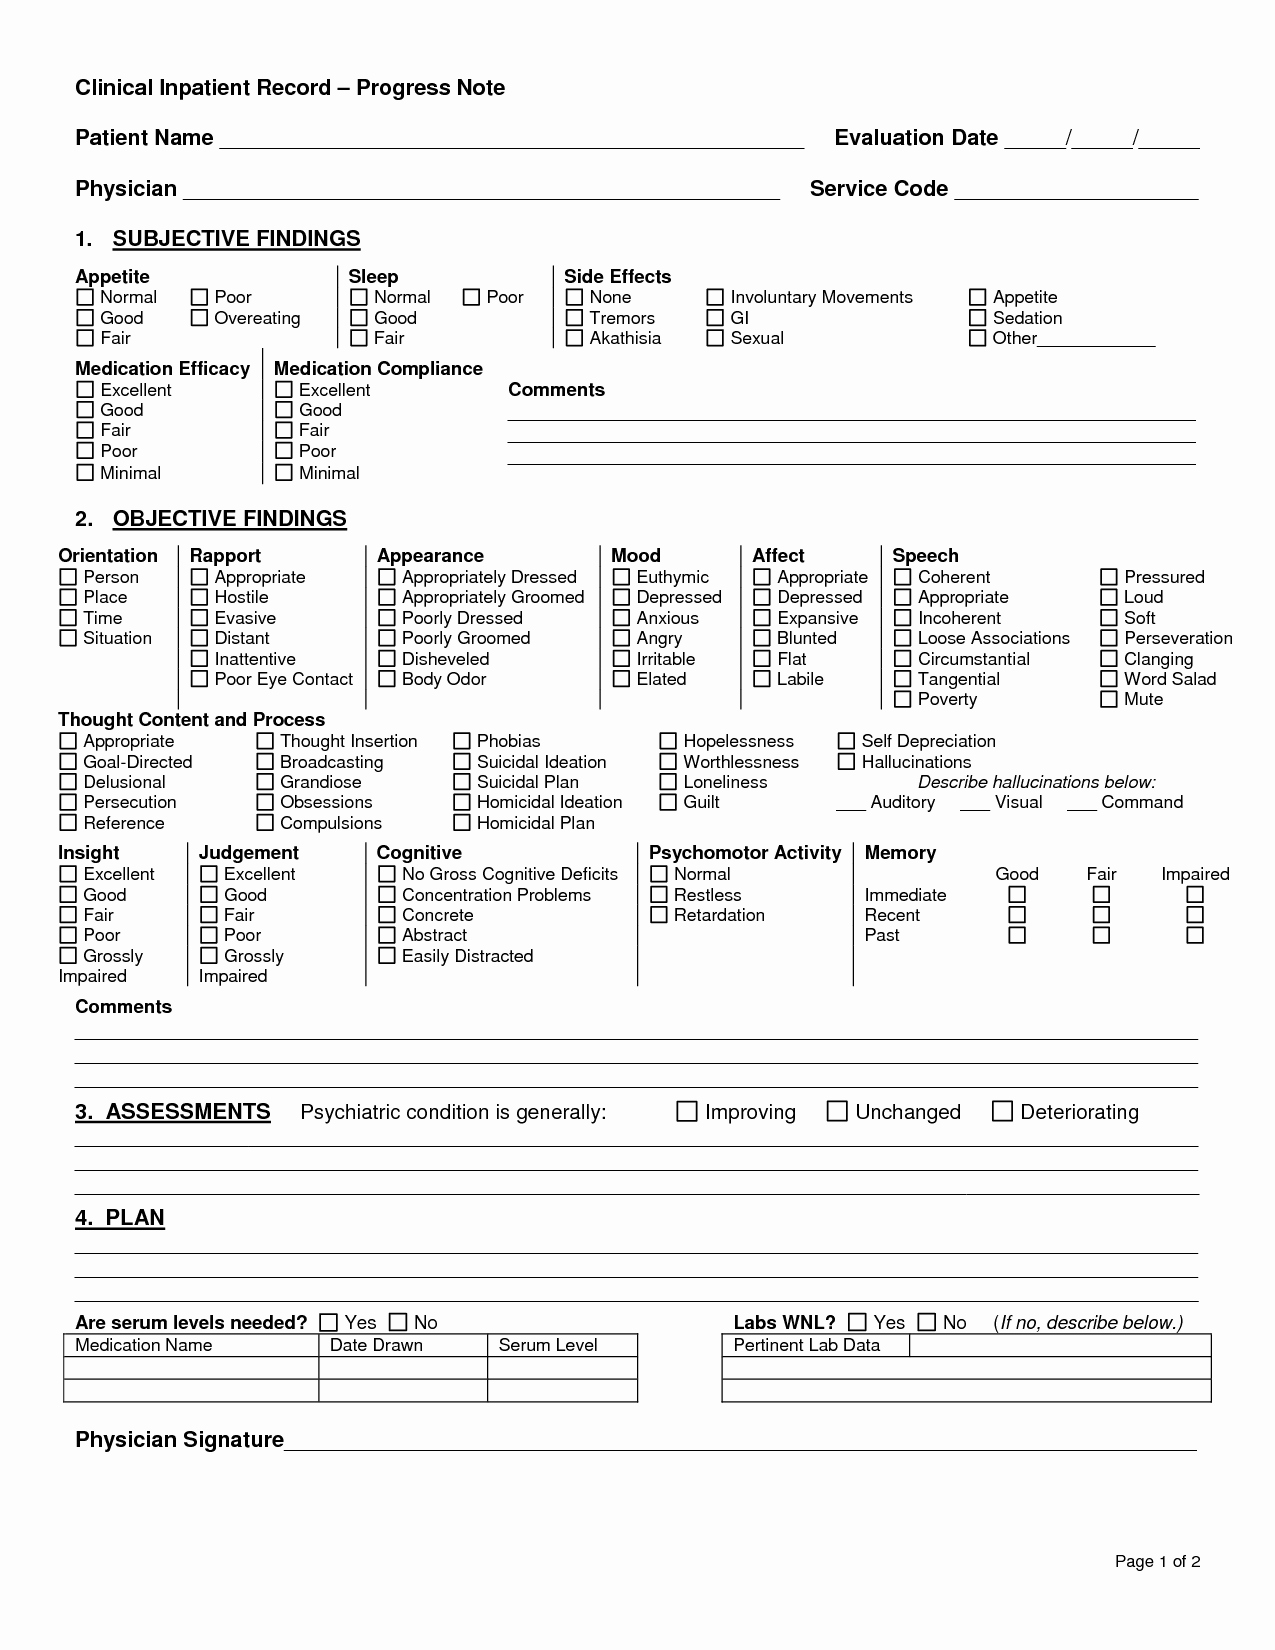 Clinical Progress Note Template